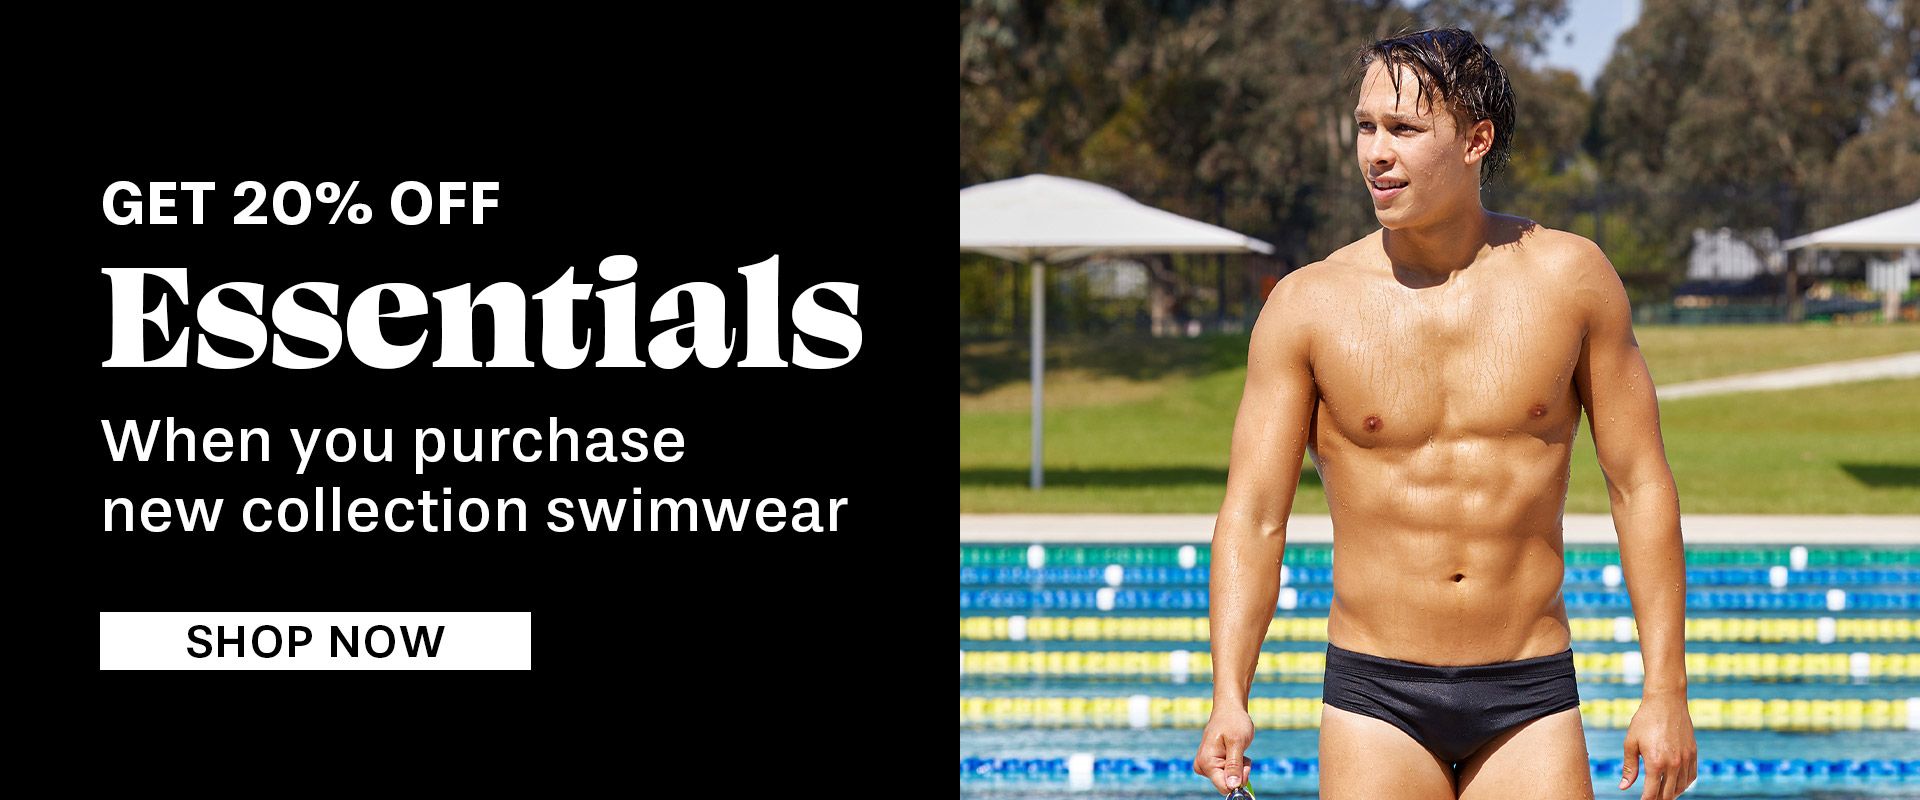 Do you wear underwear under your swimming trunks?, Page 2